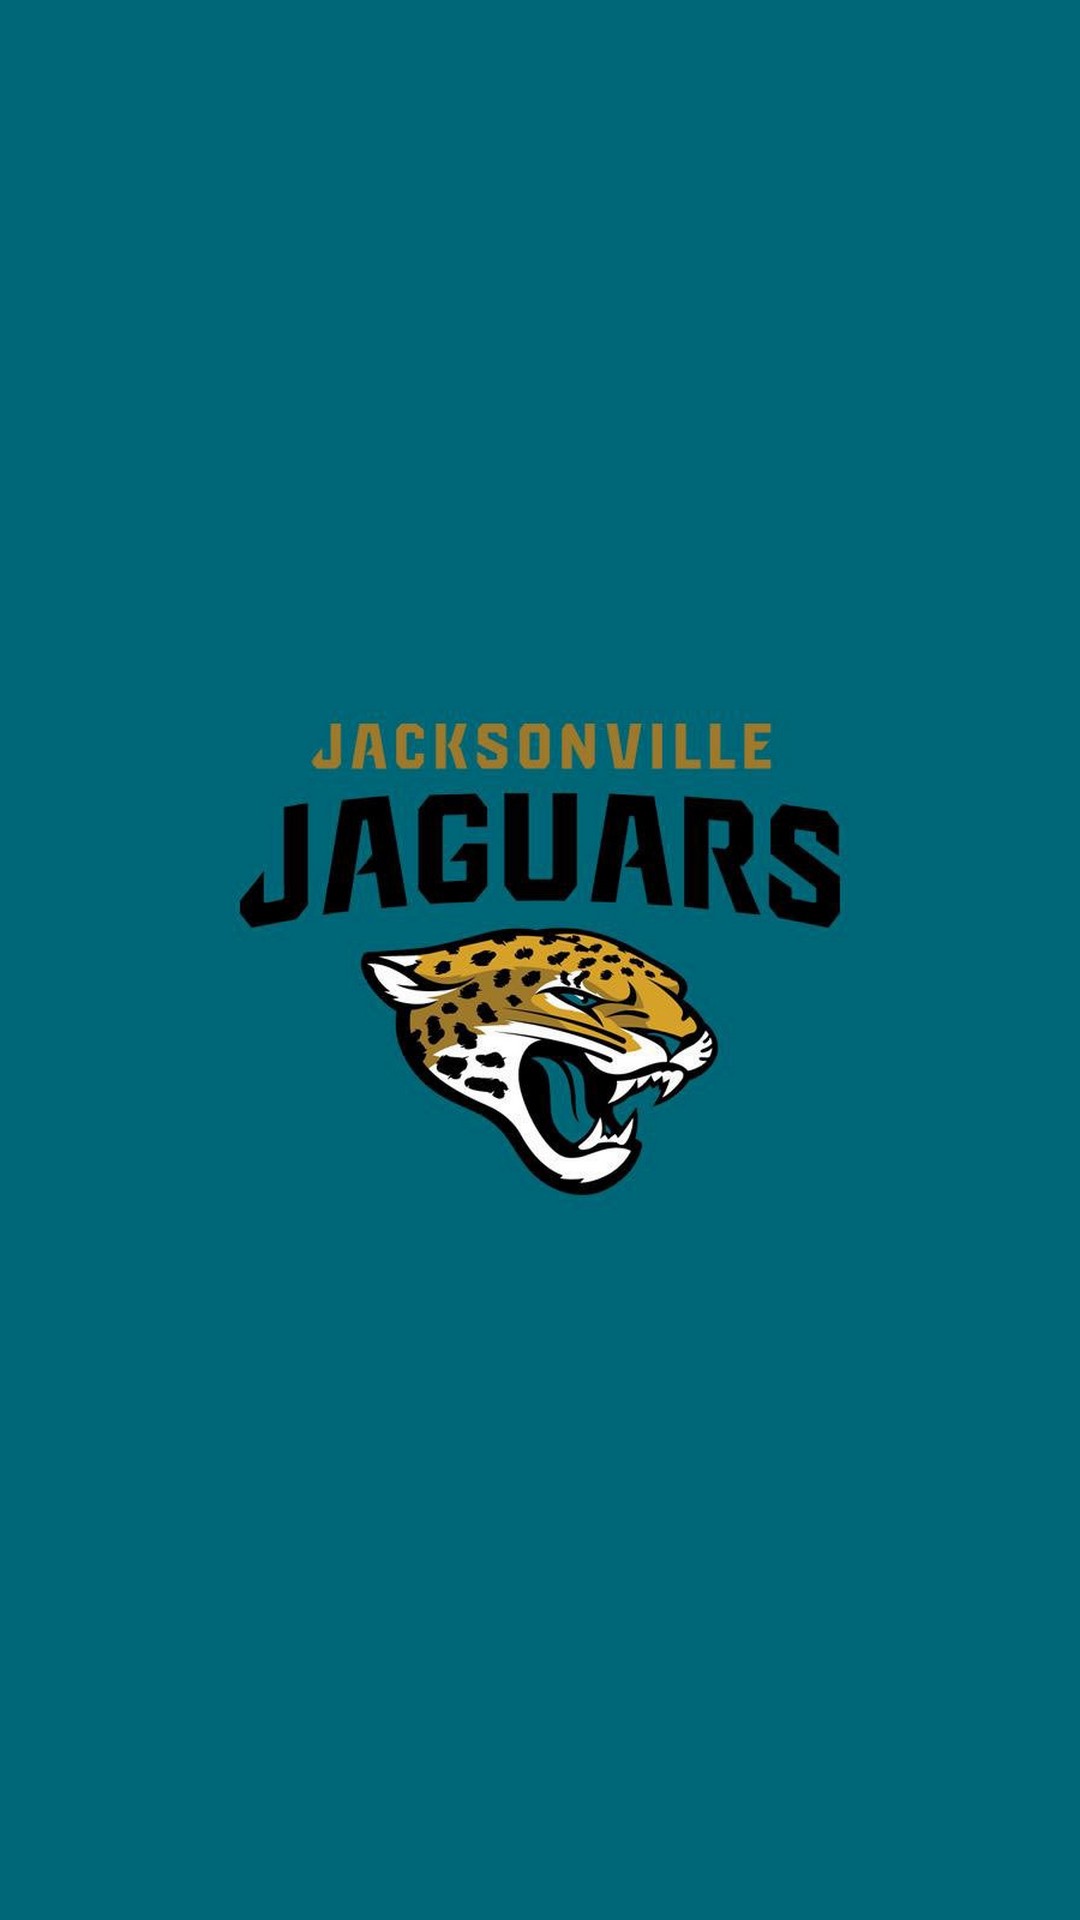 Jacksonville Jaguars iPhone Wallpaper Home Screen with high-resolution 1080x1920 pixel. Download and set as wallpaper for Desktop Computer, Apple iPhone X, XS Max, XR, 8, 7, 6, SE, iPad, Android